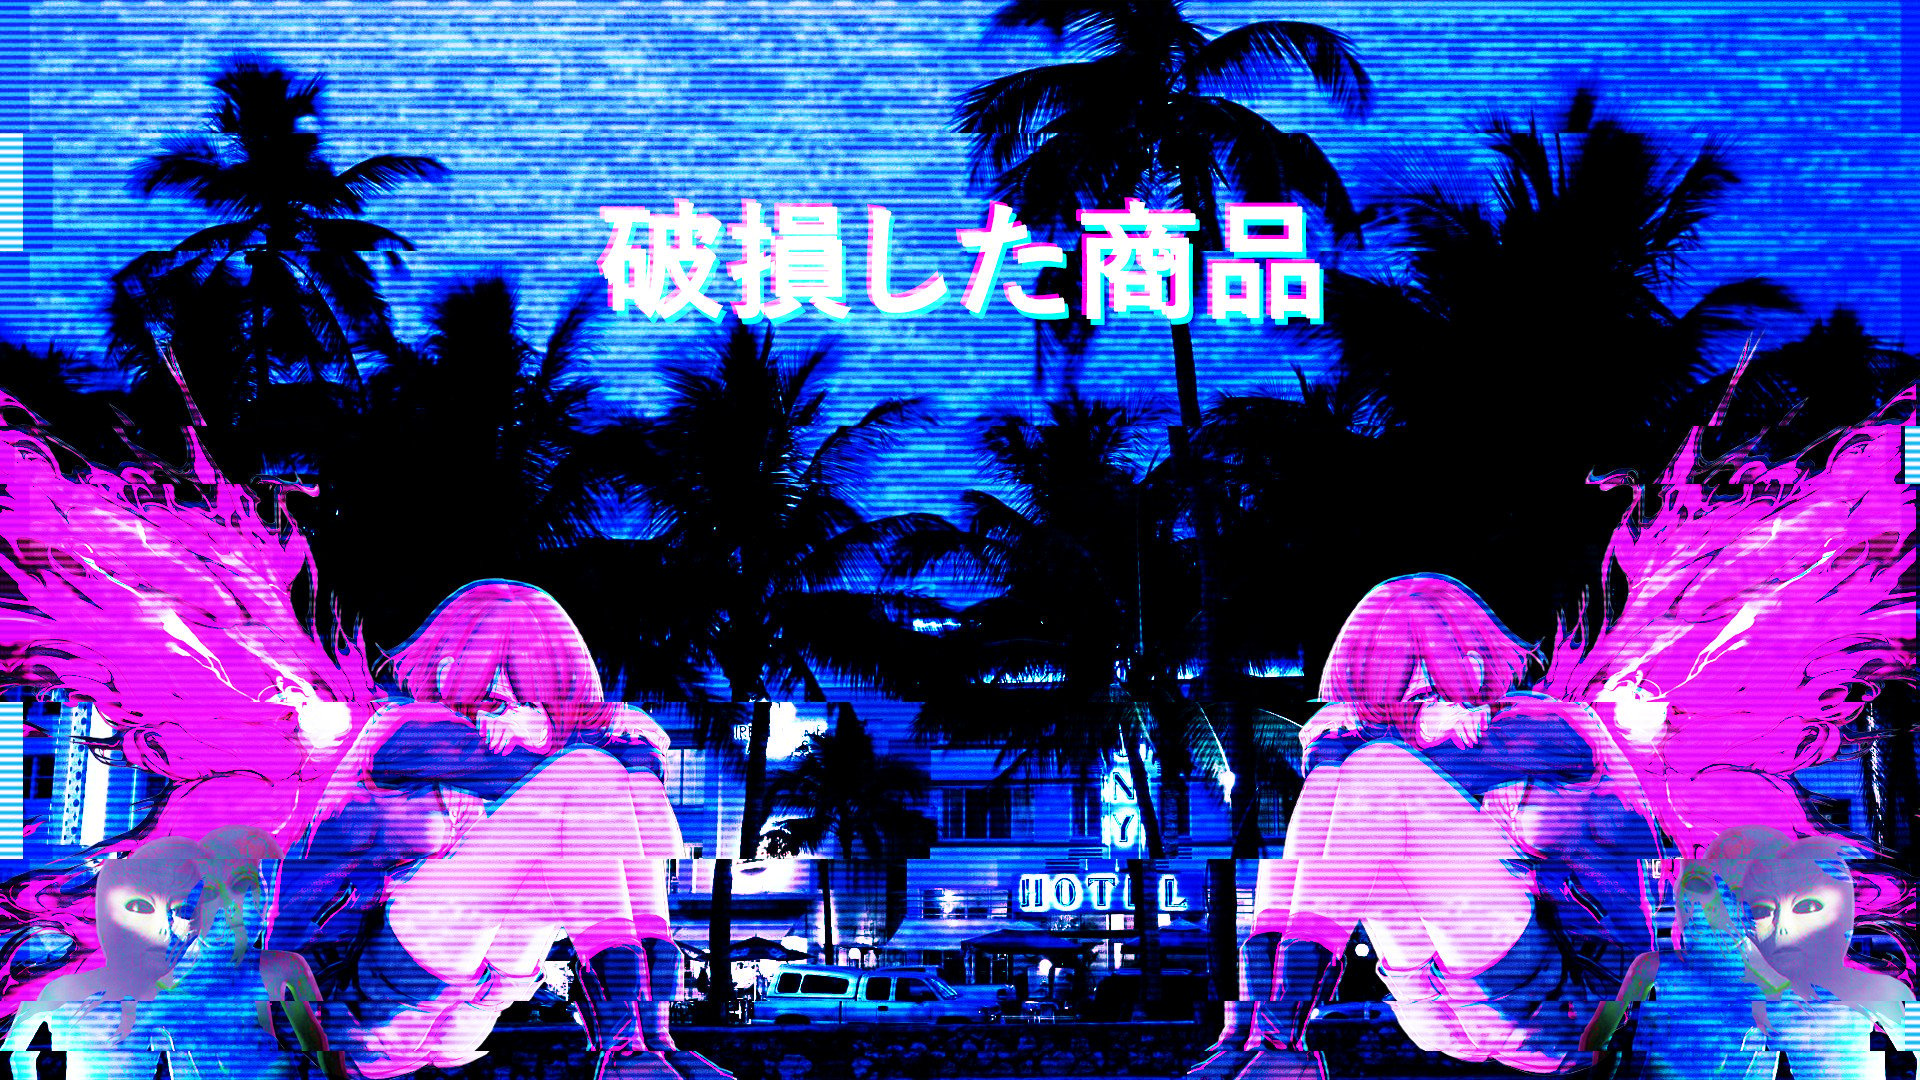 Aesthetic Wallpaper. HD Background Image